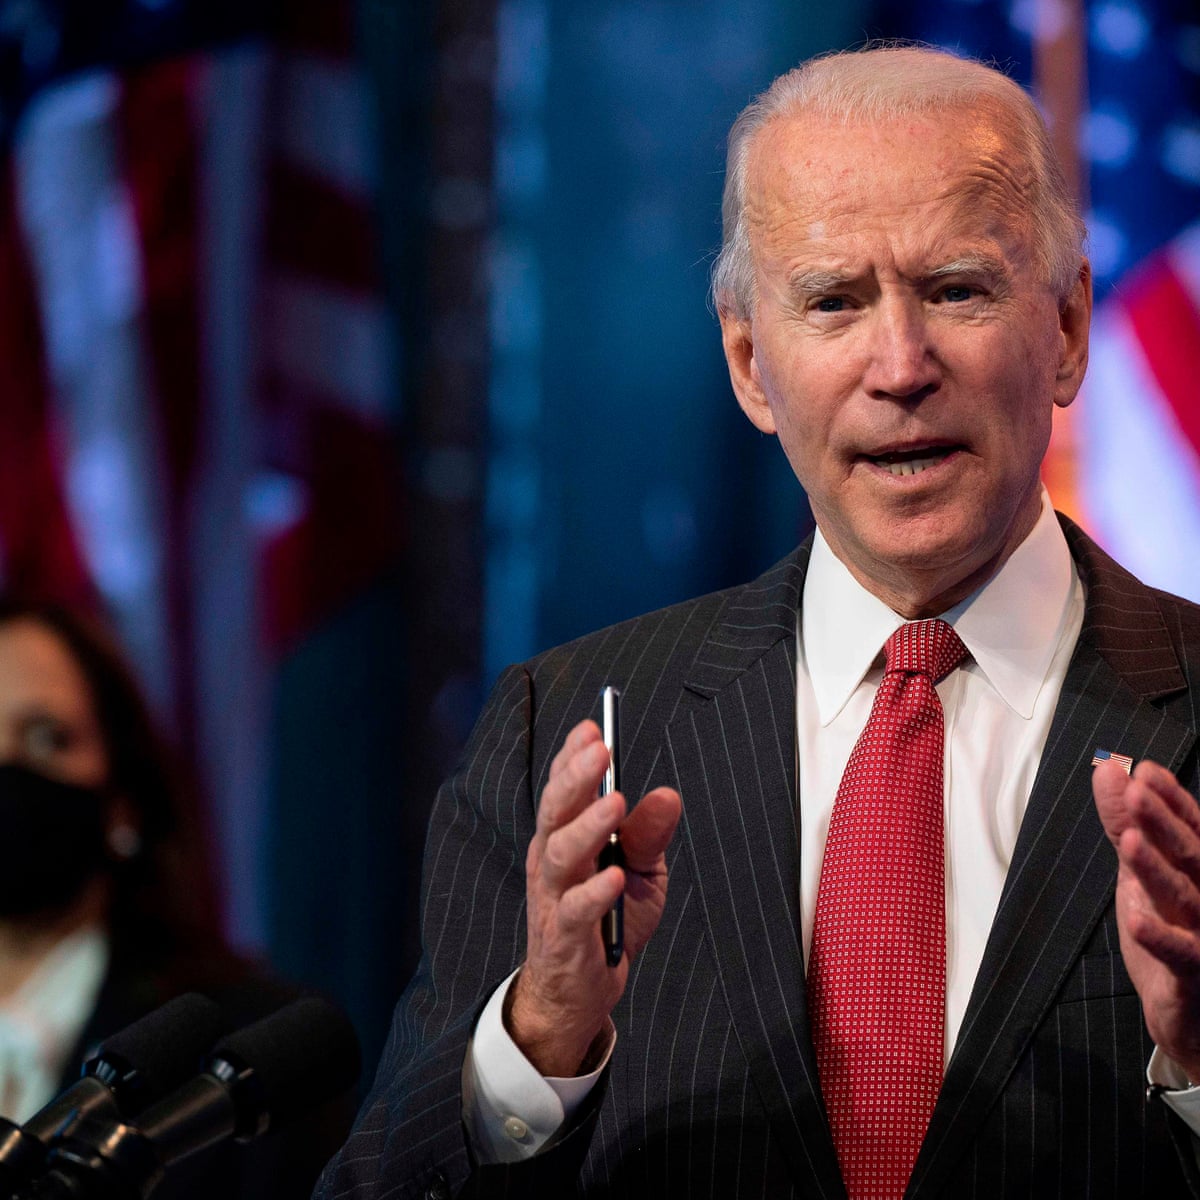 how okd is joe biden - Biden|President|Joe|Years|Trump|Delaware|Vice|Time|Obama|Senate|States|Law|Age|Campaign|Election|Administration|Family|House|Senator|Office|School|Wife|People|Hunter|University|Act|State|Year|Life|Party|Committee|Children|Beau|Daughter|War|Jill|Day|Facts|Americans|Presidency|Joe Biden|United States|Vice President|White House|Law School|President Trump|Foreign Relations Committee|Donald Trump|President Biden|Presidential Campaign|Presidential Election|Democratic Party|Syracuse University|United Nations|Net Worth|Barack Obama|Judiciary Committee|Neilia Hunter|U.S. Senate|Hillary Clinton|New York Times|Obama Administration|Empty Store Shelves|Systemic Racism|Castle County Council|Archmere Academy|U.S. Senator|Vice Presidency|Second Term|Biden Administration